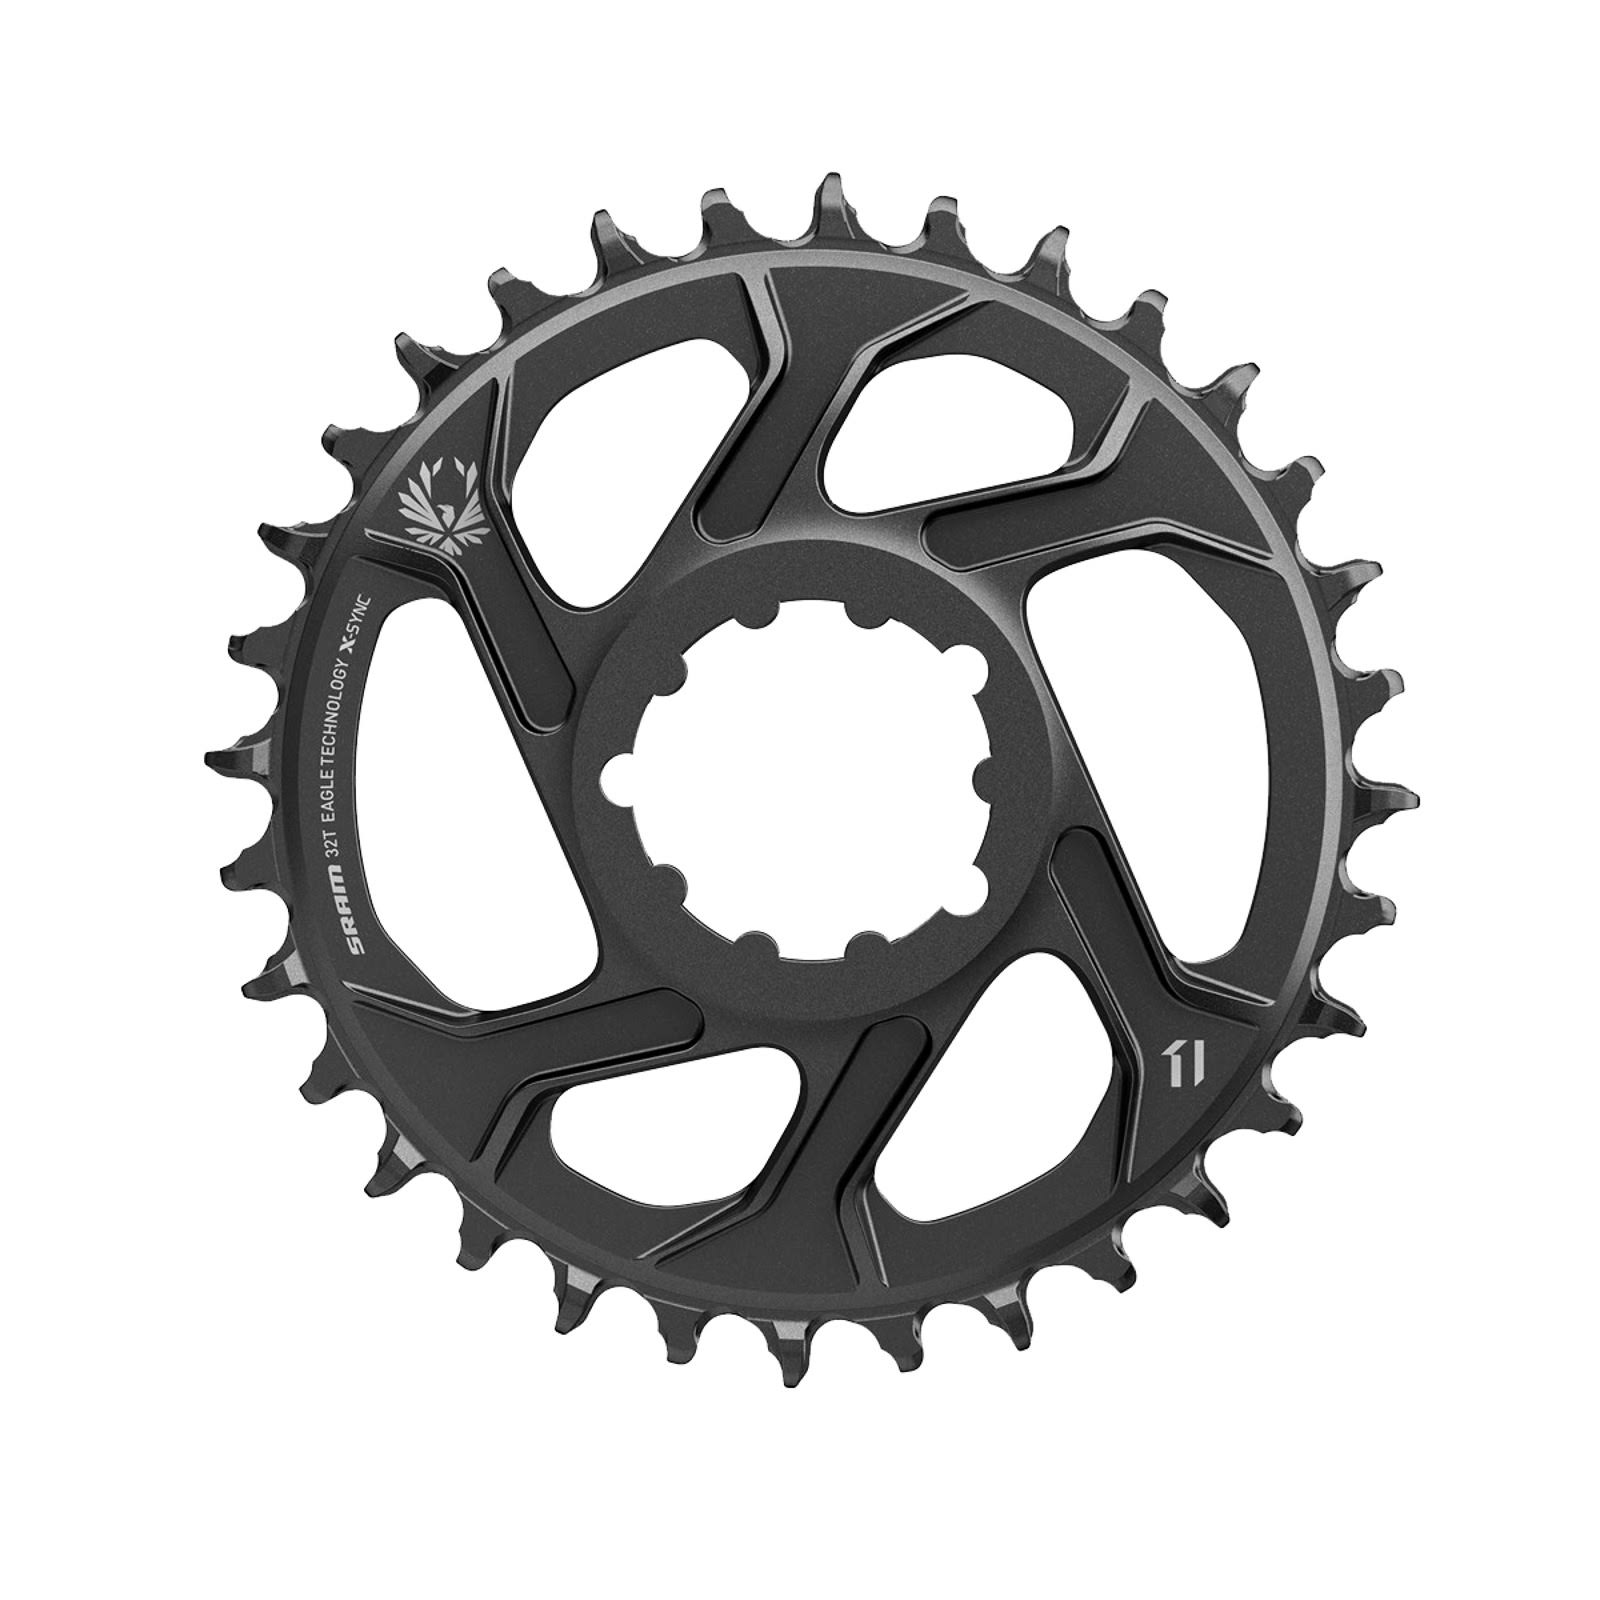 Sram X Sync 2 Eagle Cold Forged Aluminum Chainring - Black, 30T